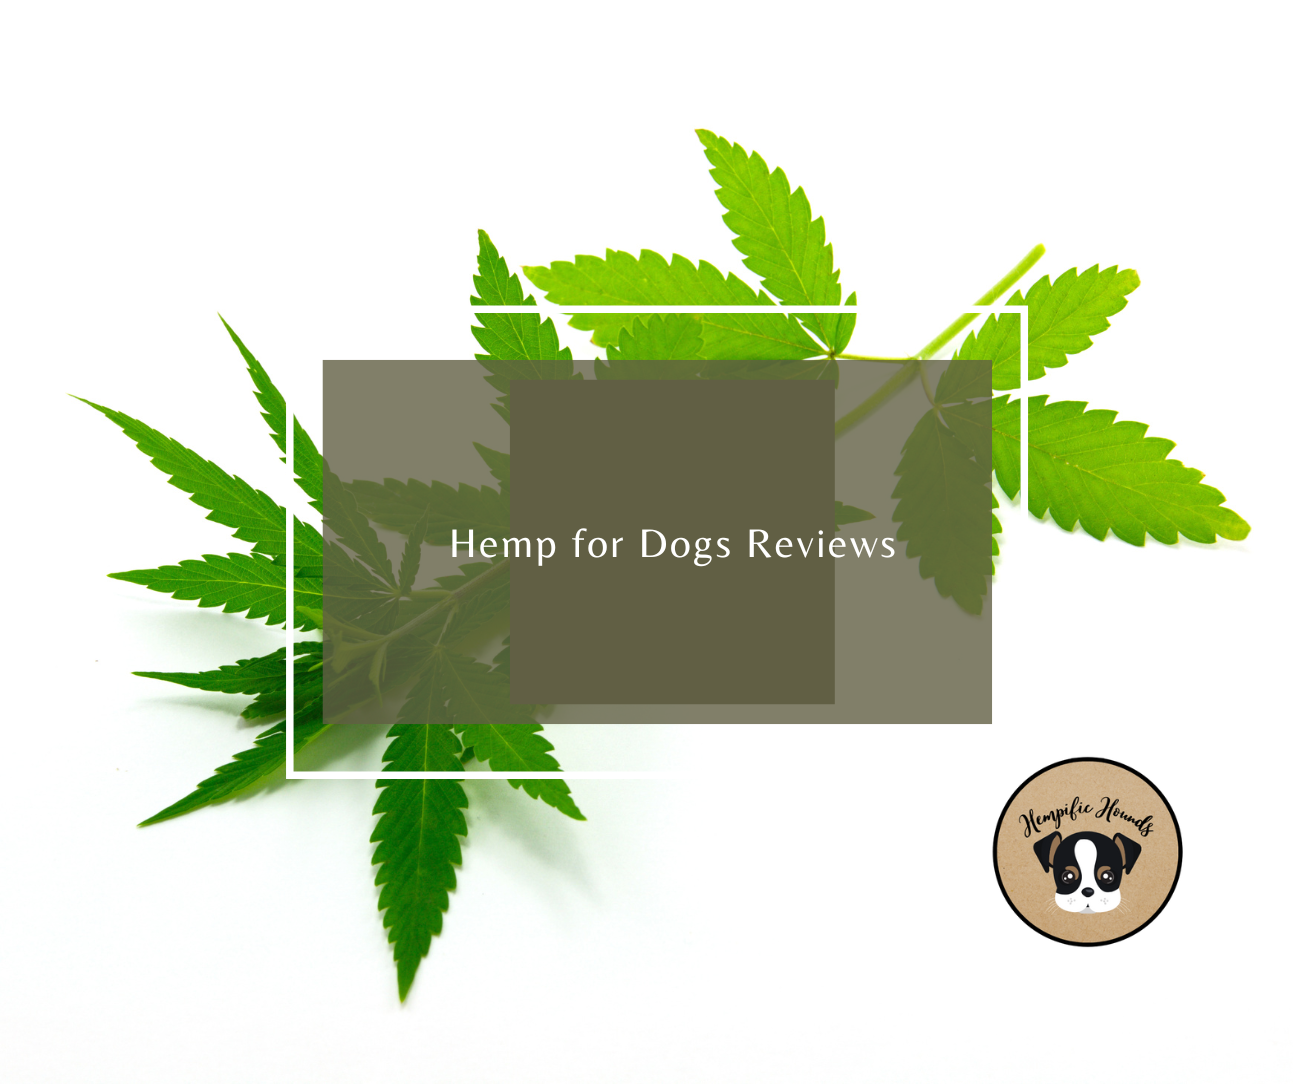 Hemp for Dogs Reviews